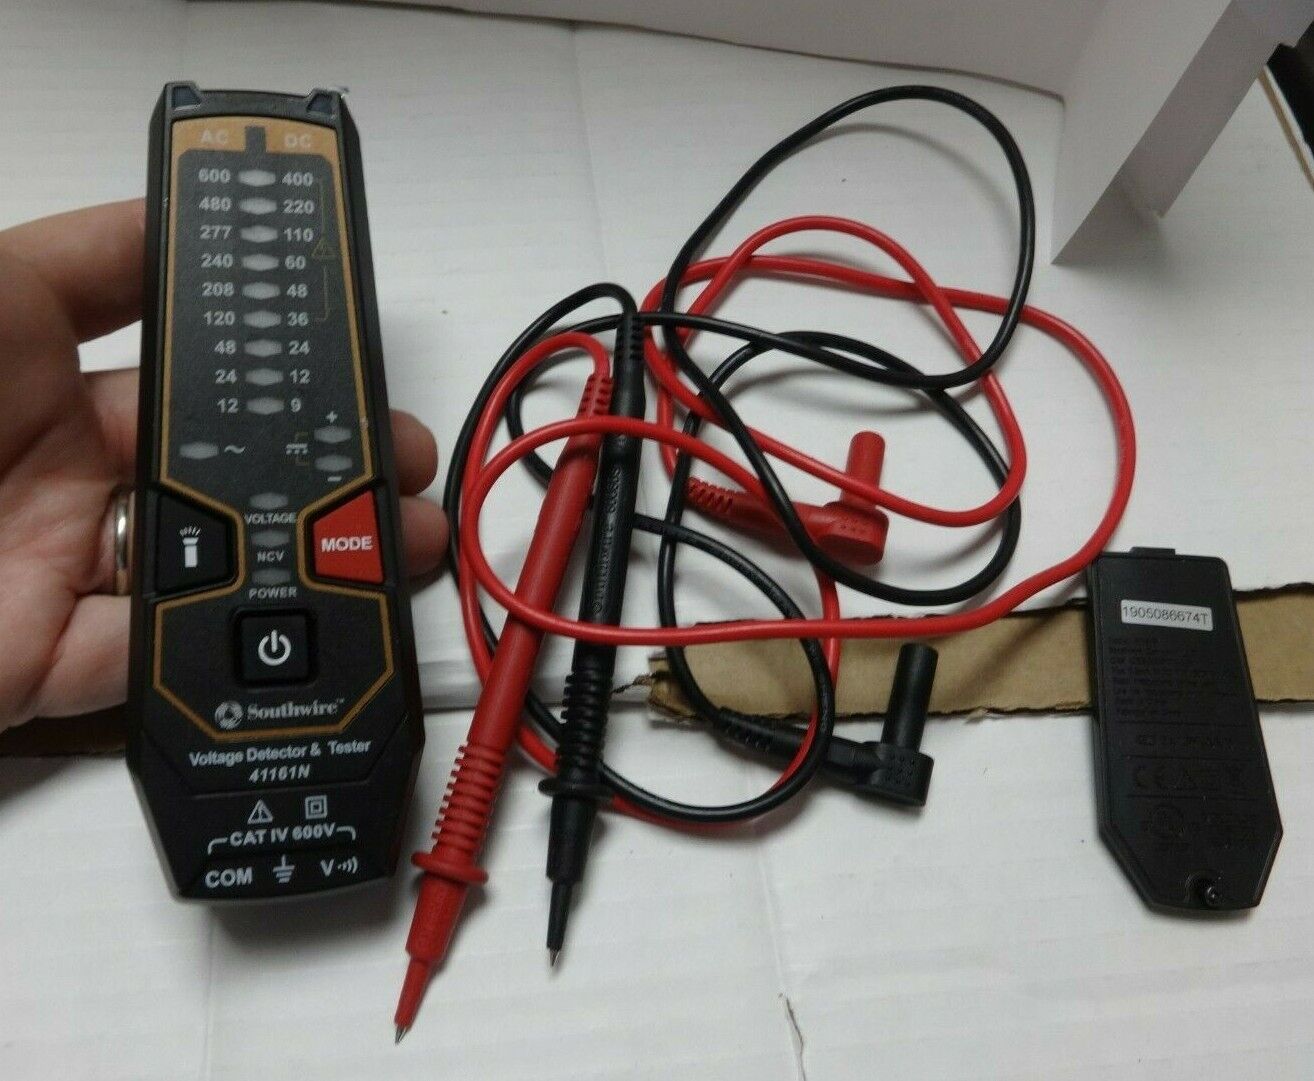 Southwire 41161N Voltage Detector & Tester